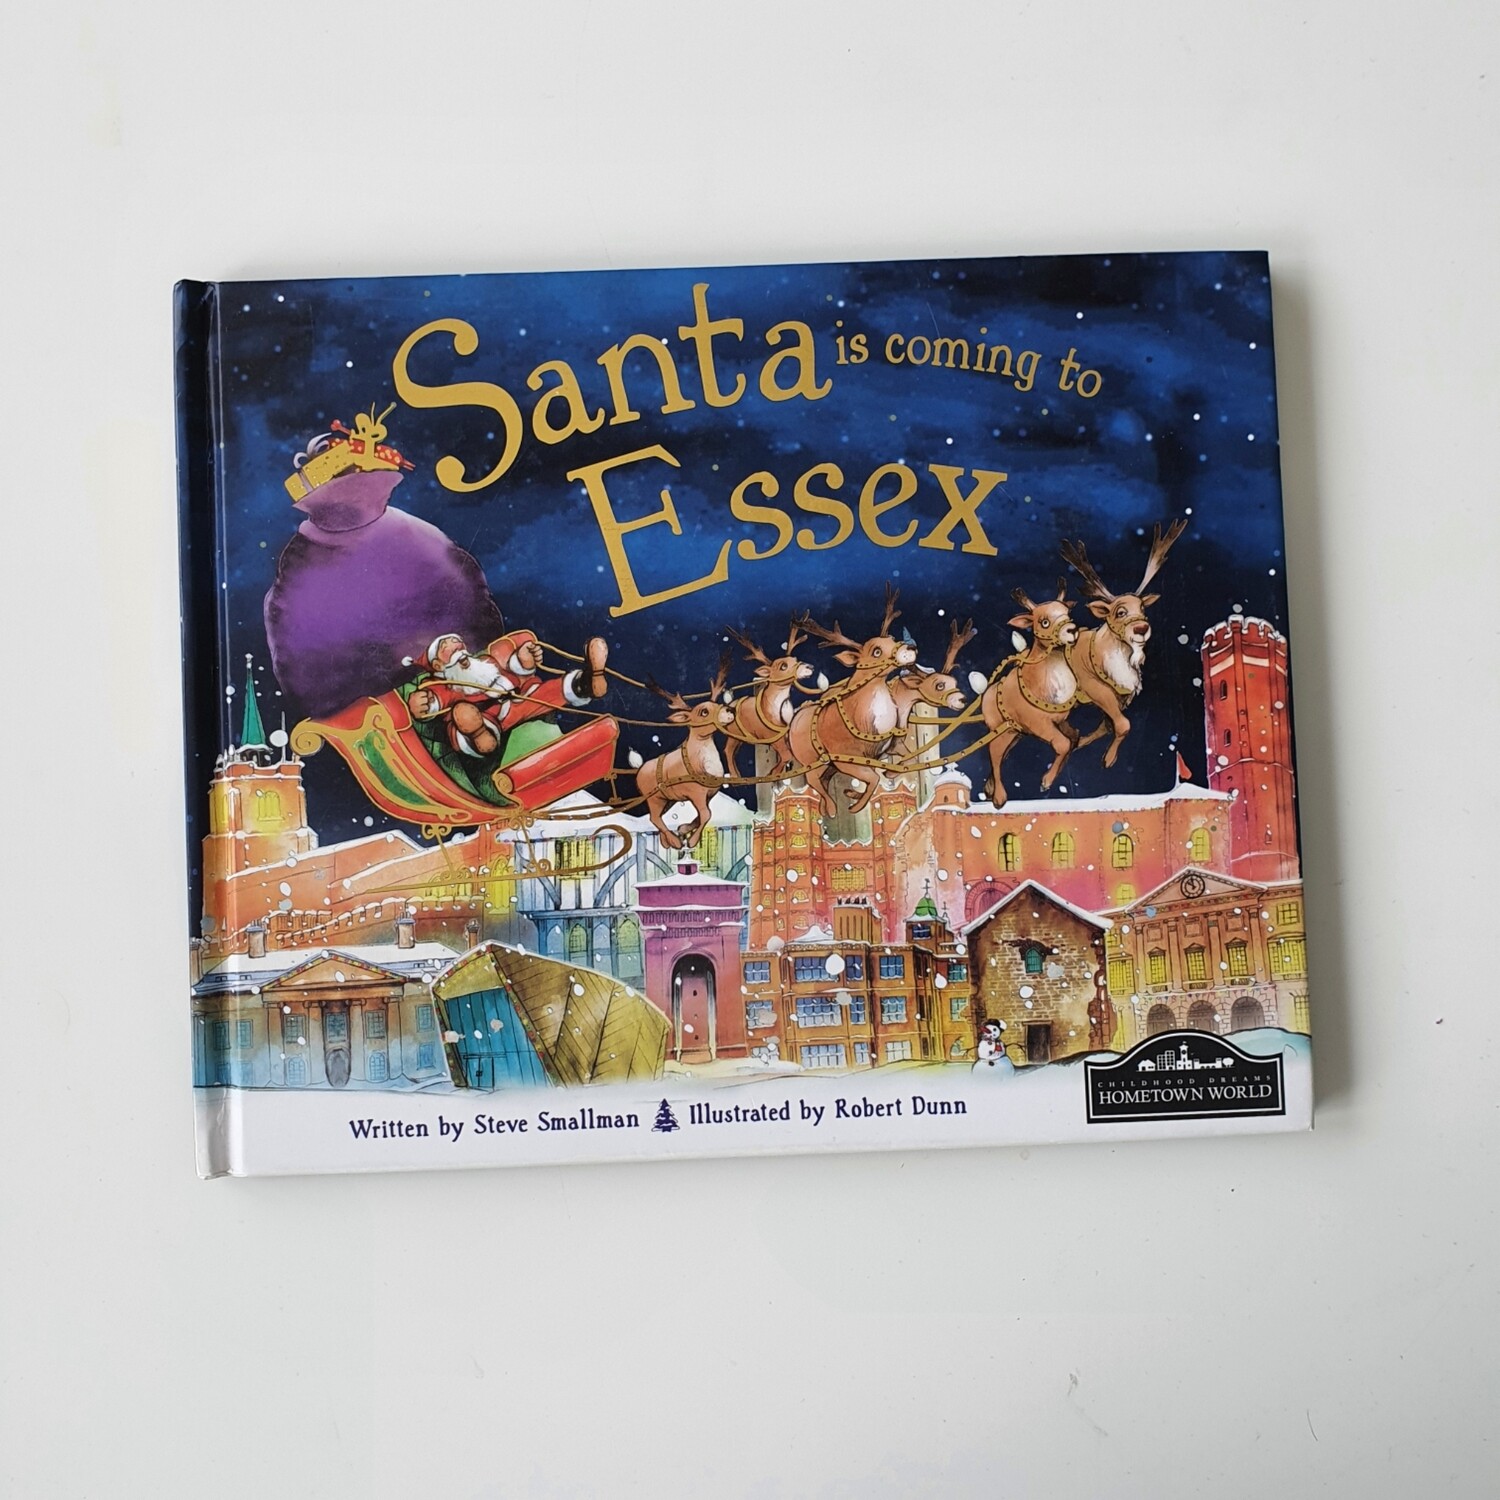 Santa is coming to Essex - Christmas